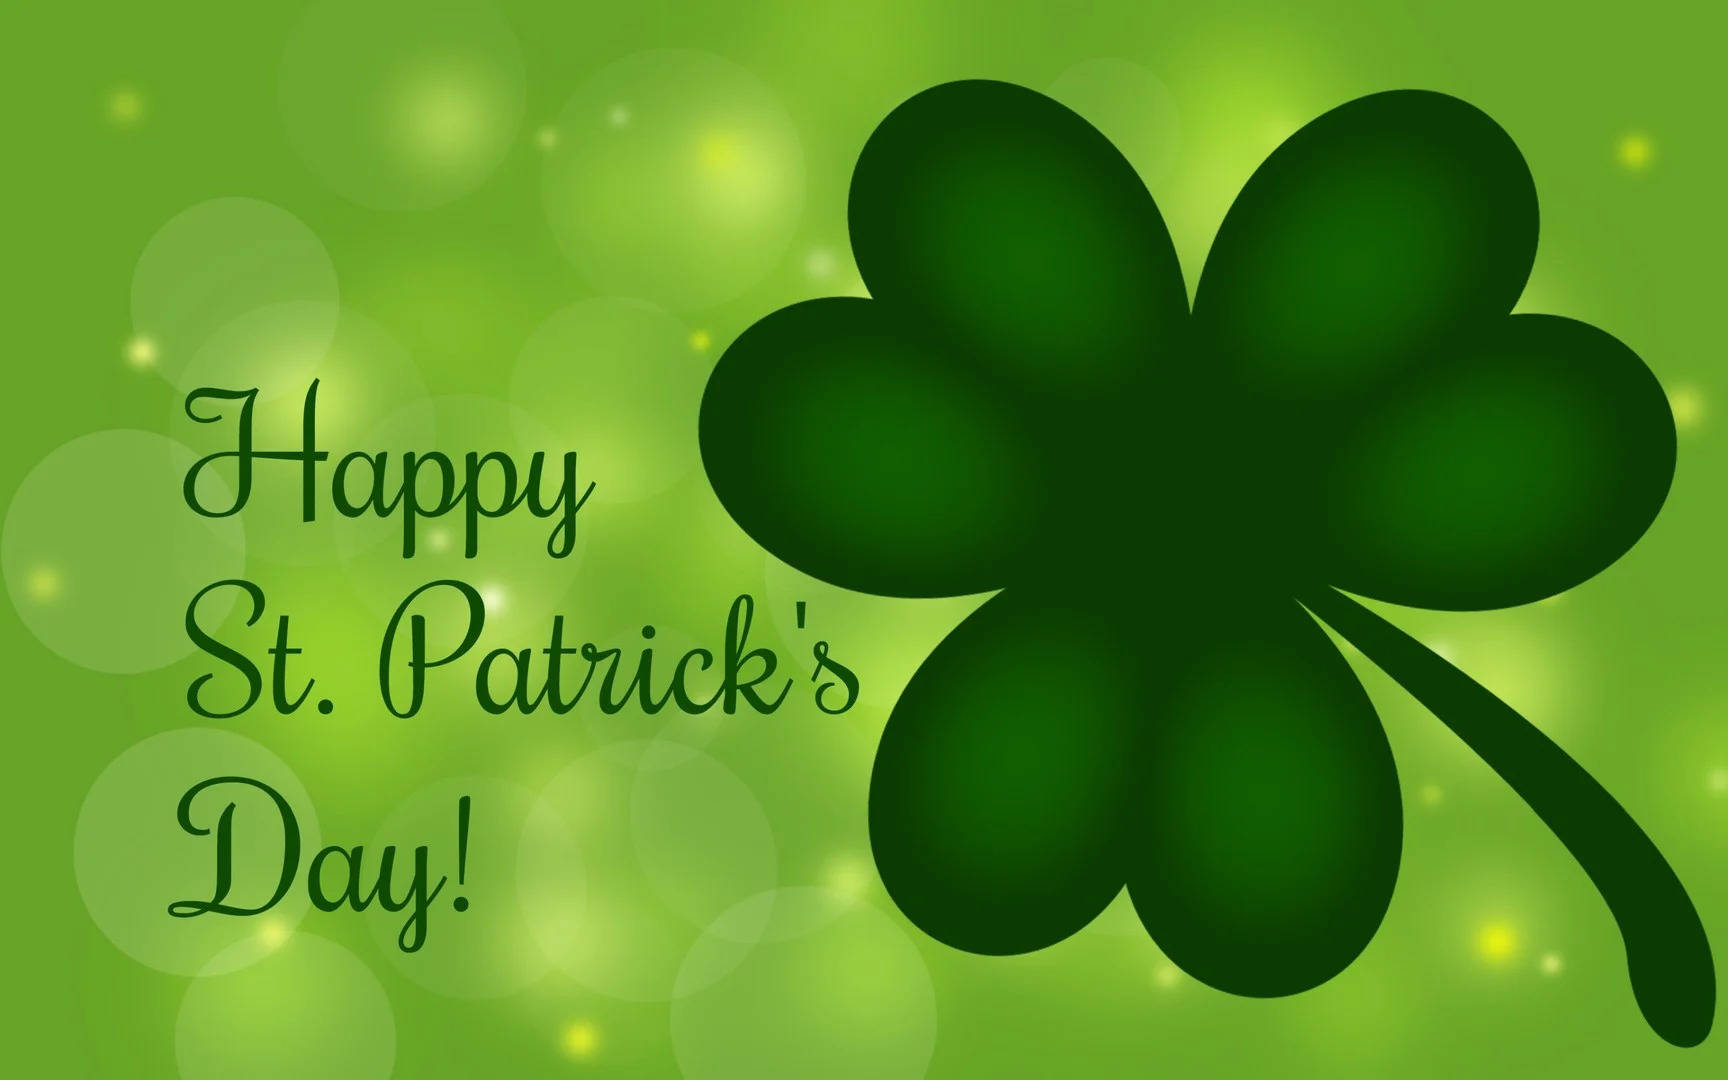 Saint Patrick’s Day With Big Green Clover Background